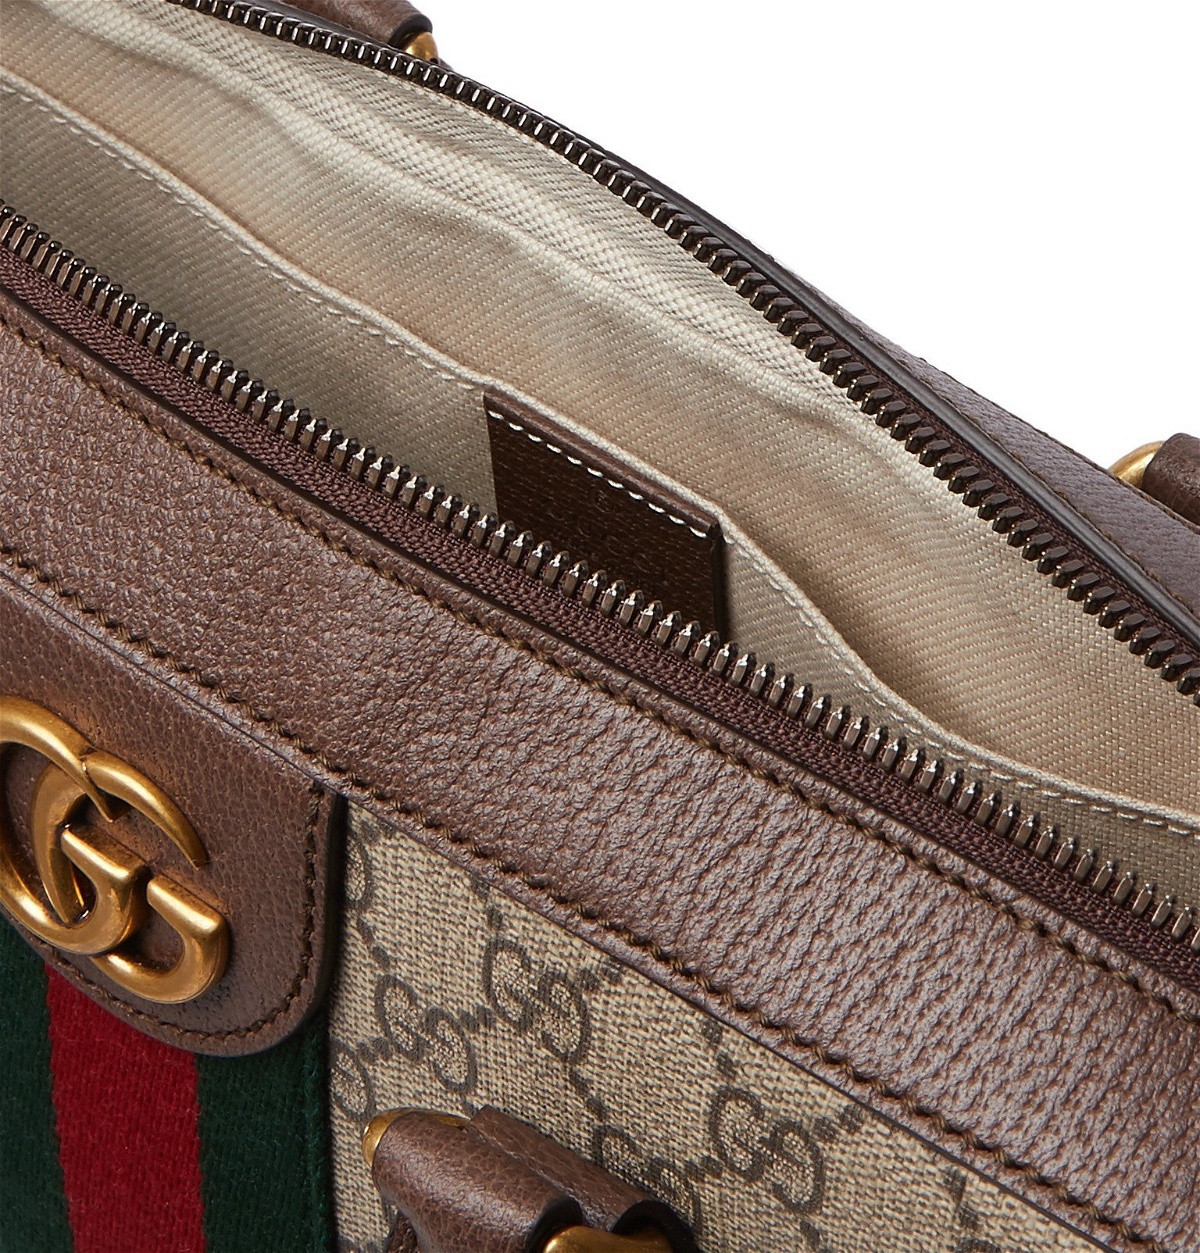 Gucci - Ophidia Leather-Trimmed Monogrammed Coated-Canvas Briefcase - Brown  Gucci